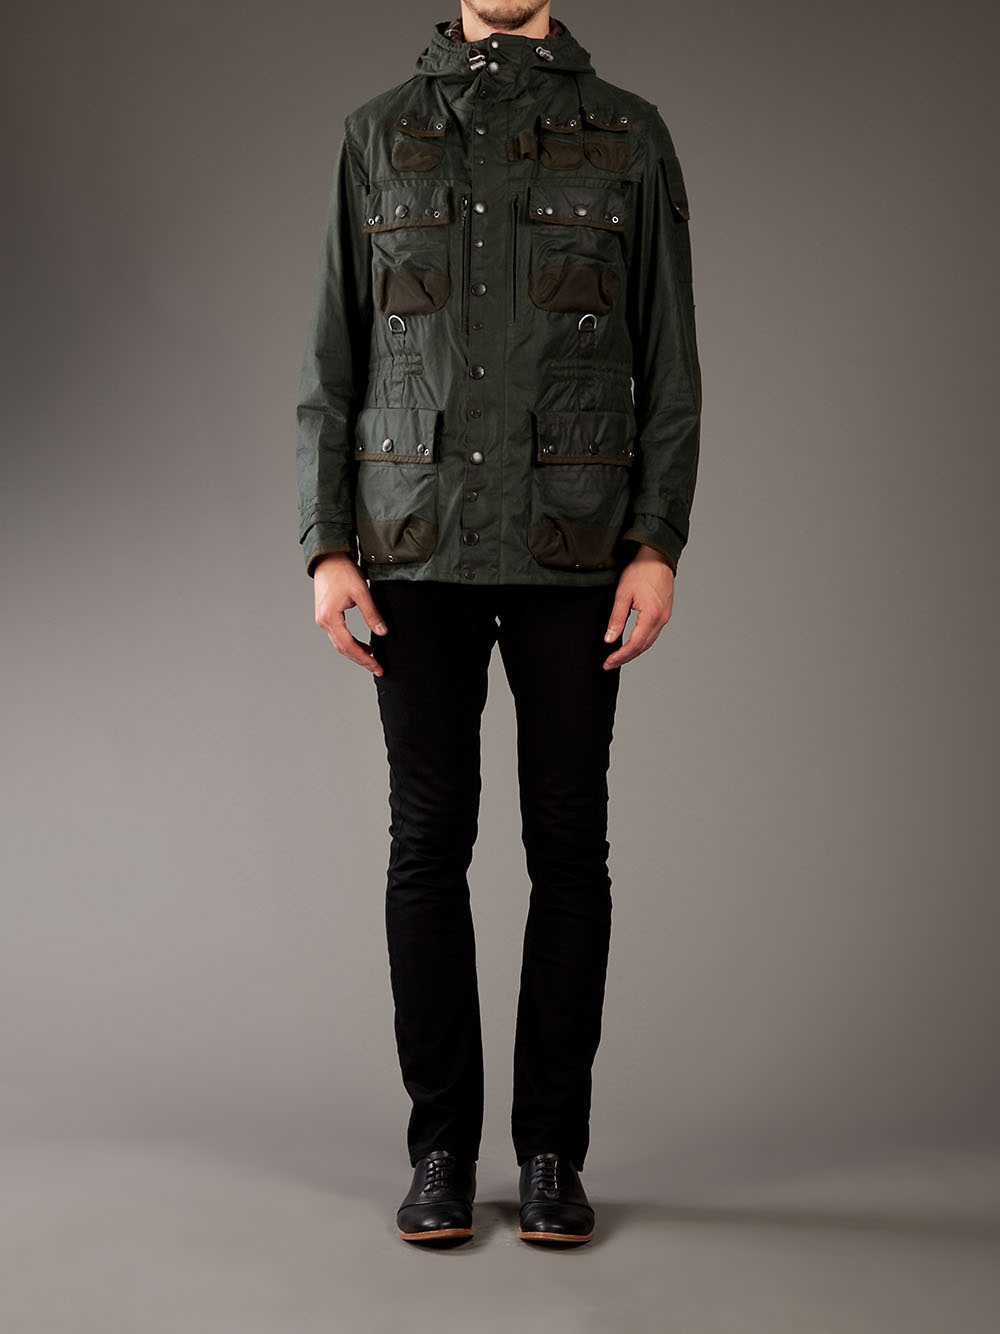 Barbour Military Offers Shop, 59% OFF | aarav.co